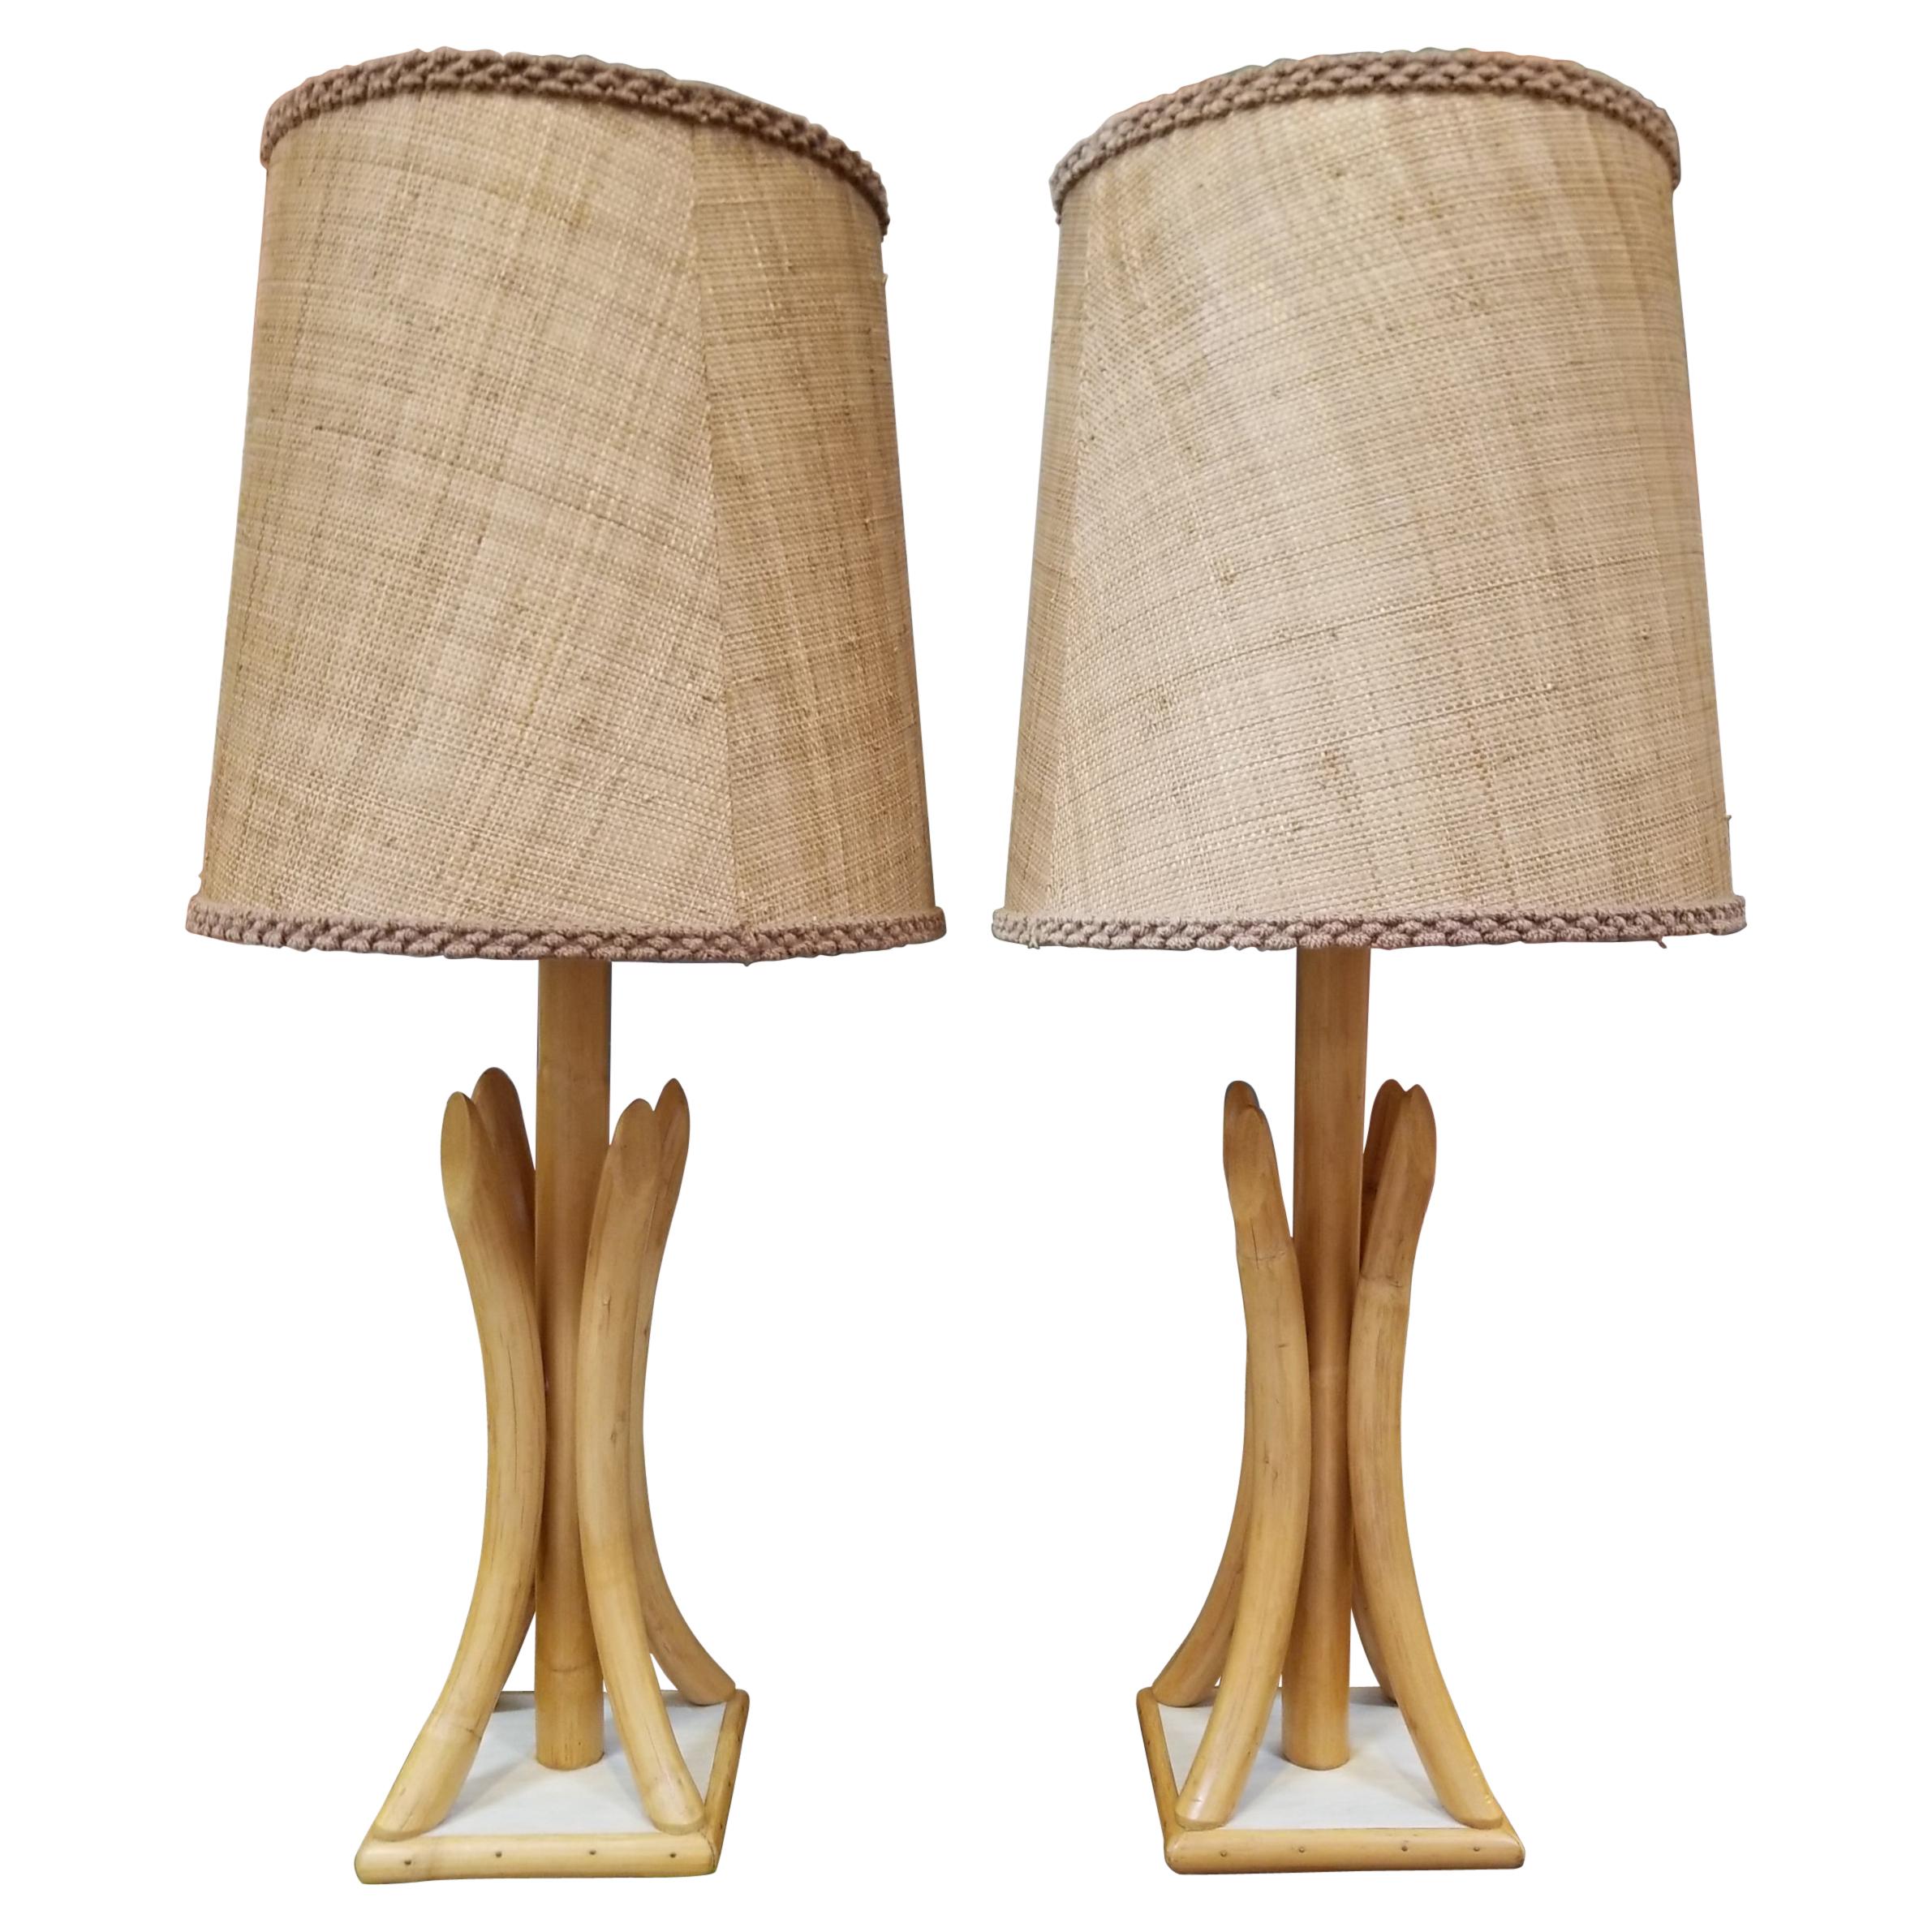 1950 S Bamboo Rattan Table Lamps For, Bamboo Vessel Table Lamps